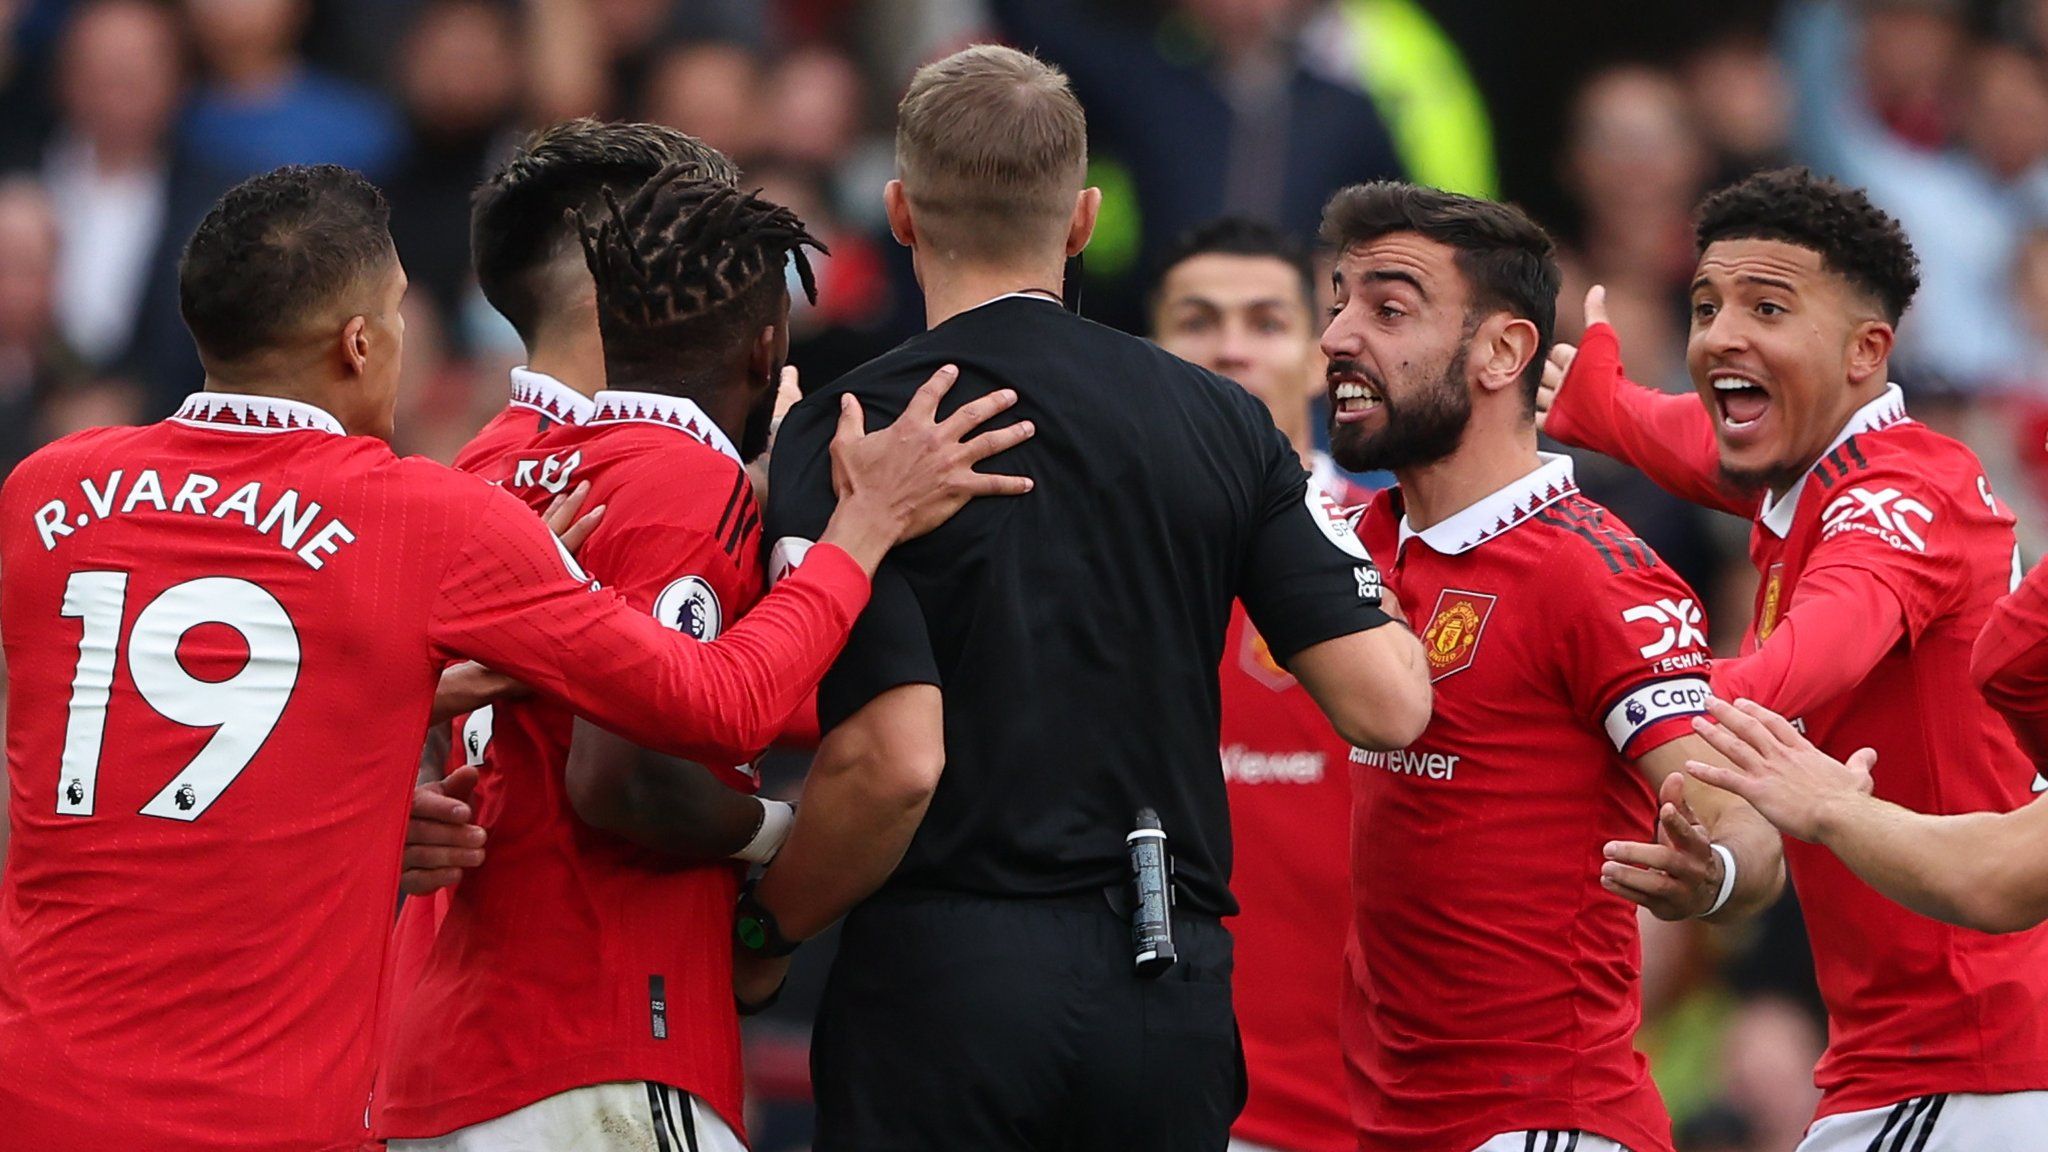 Manchester United players surround the referee